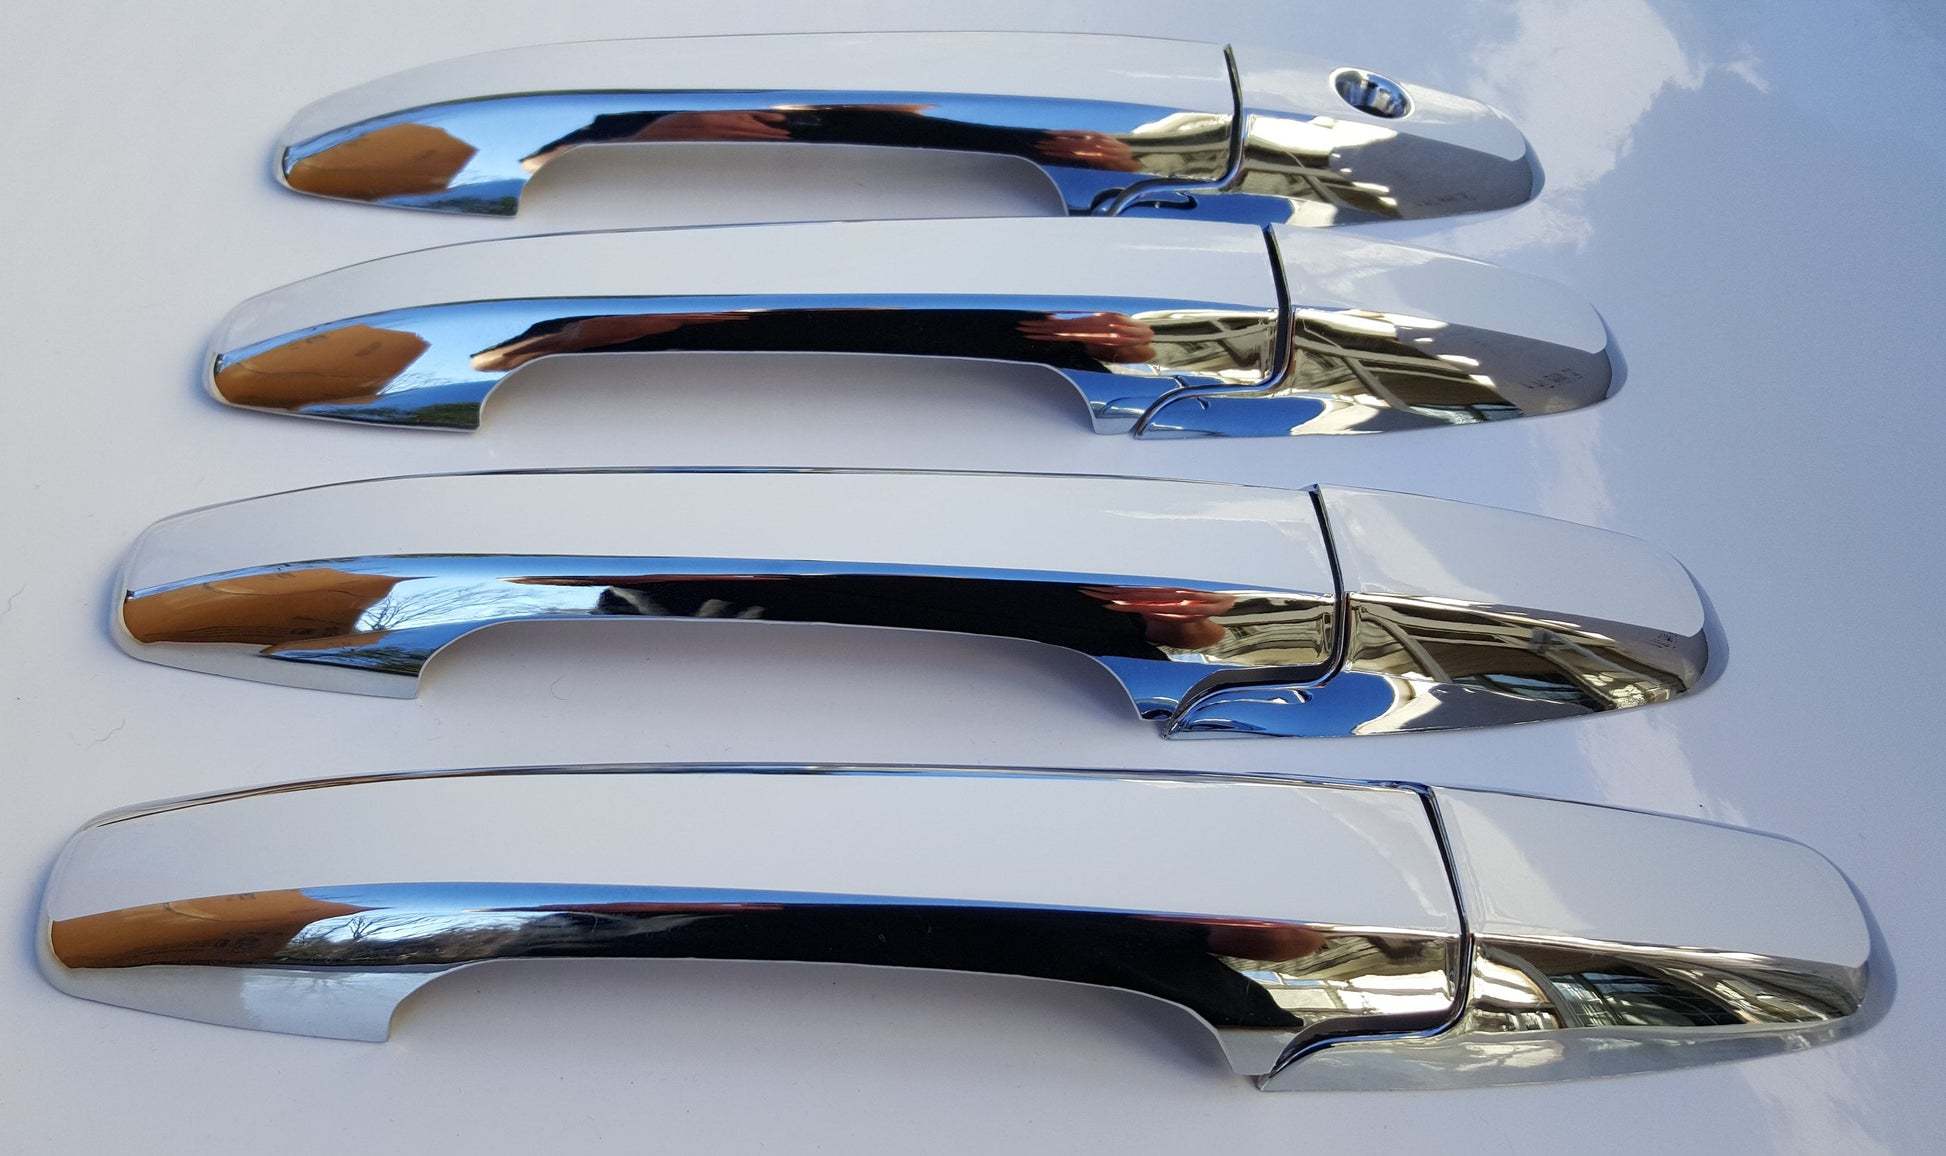 Full Set of Custom Black OR Chrome Door Handle Overlays / Covers For 2006 - 2011 Honda Civic  -- You Choose the Color of the Middle Insert